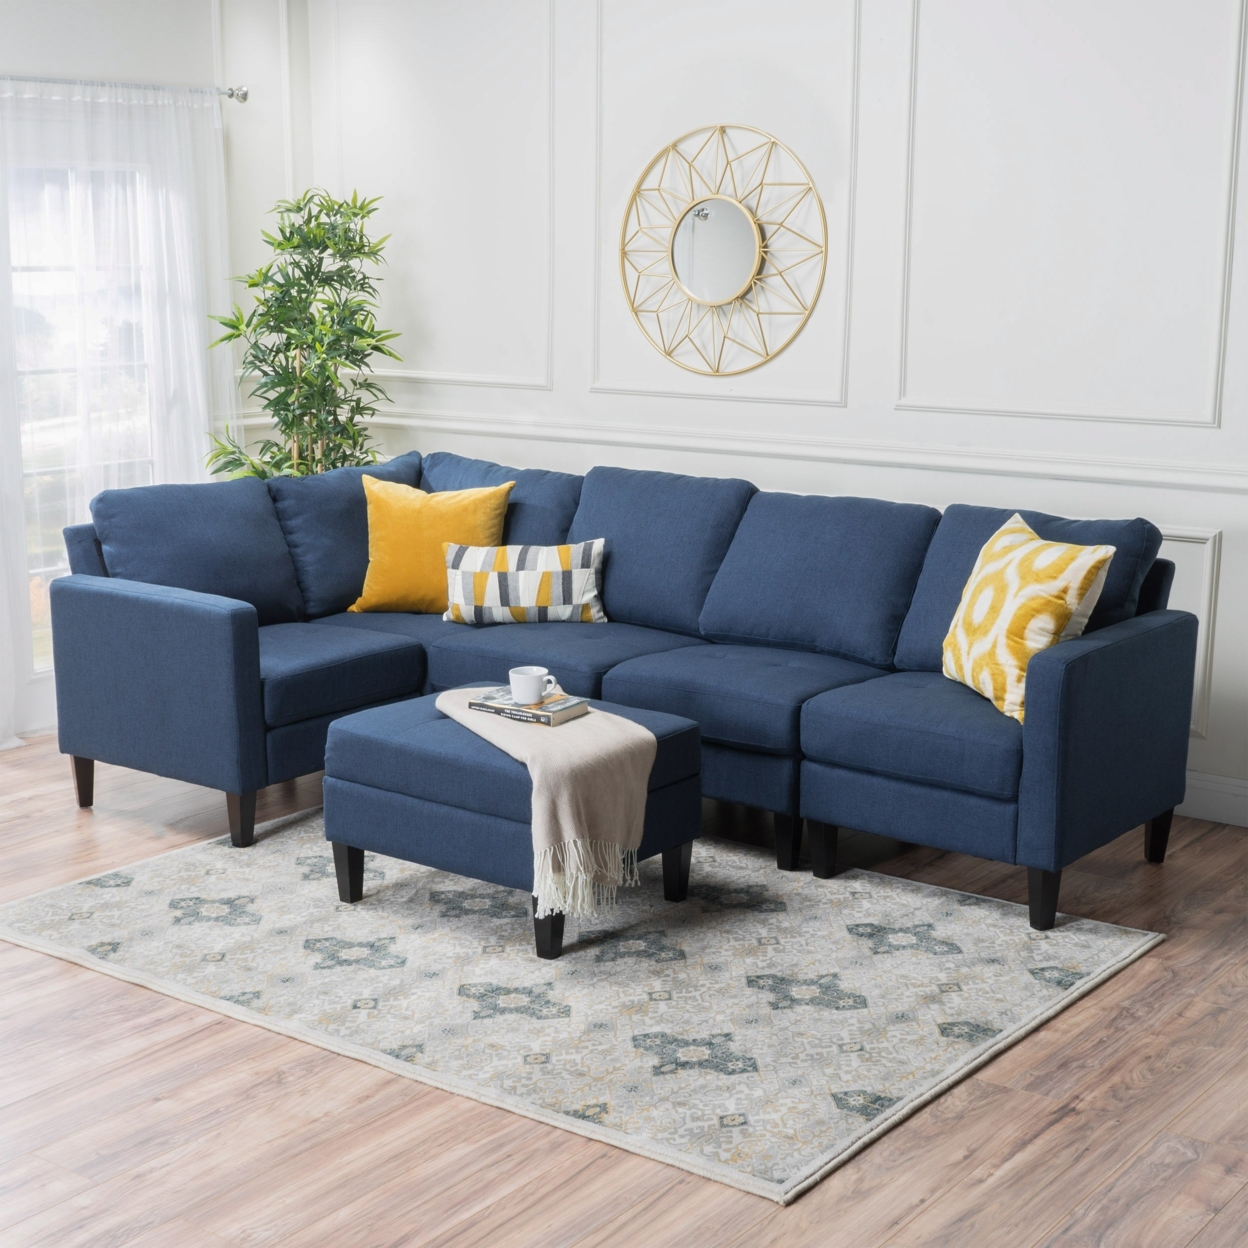 Bridger Fabric Sectional Couch With Ottoman - Light Gray